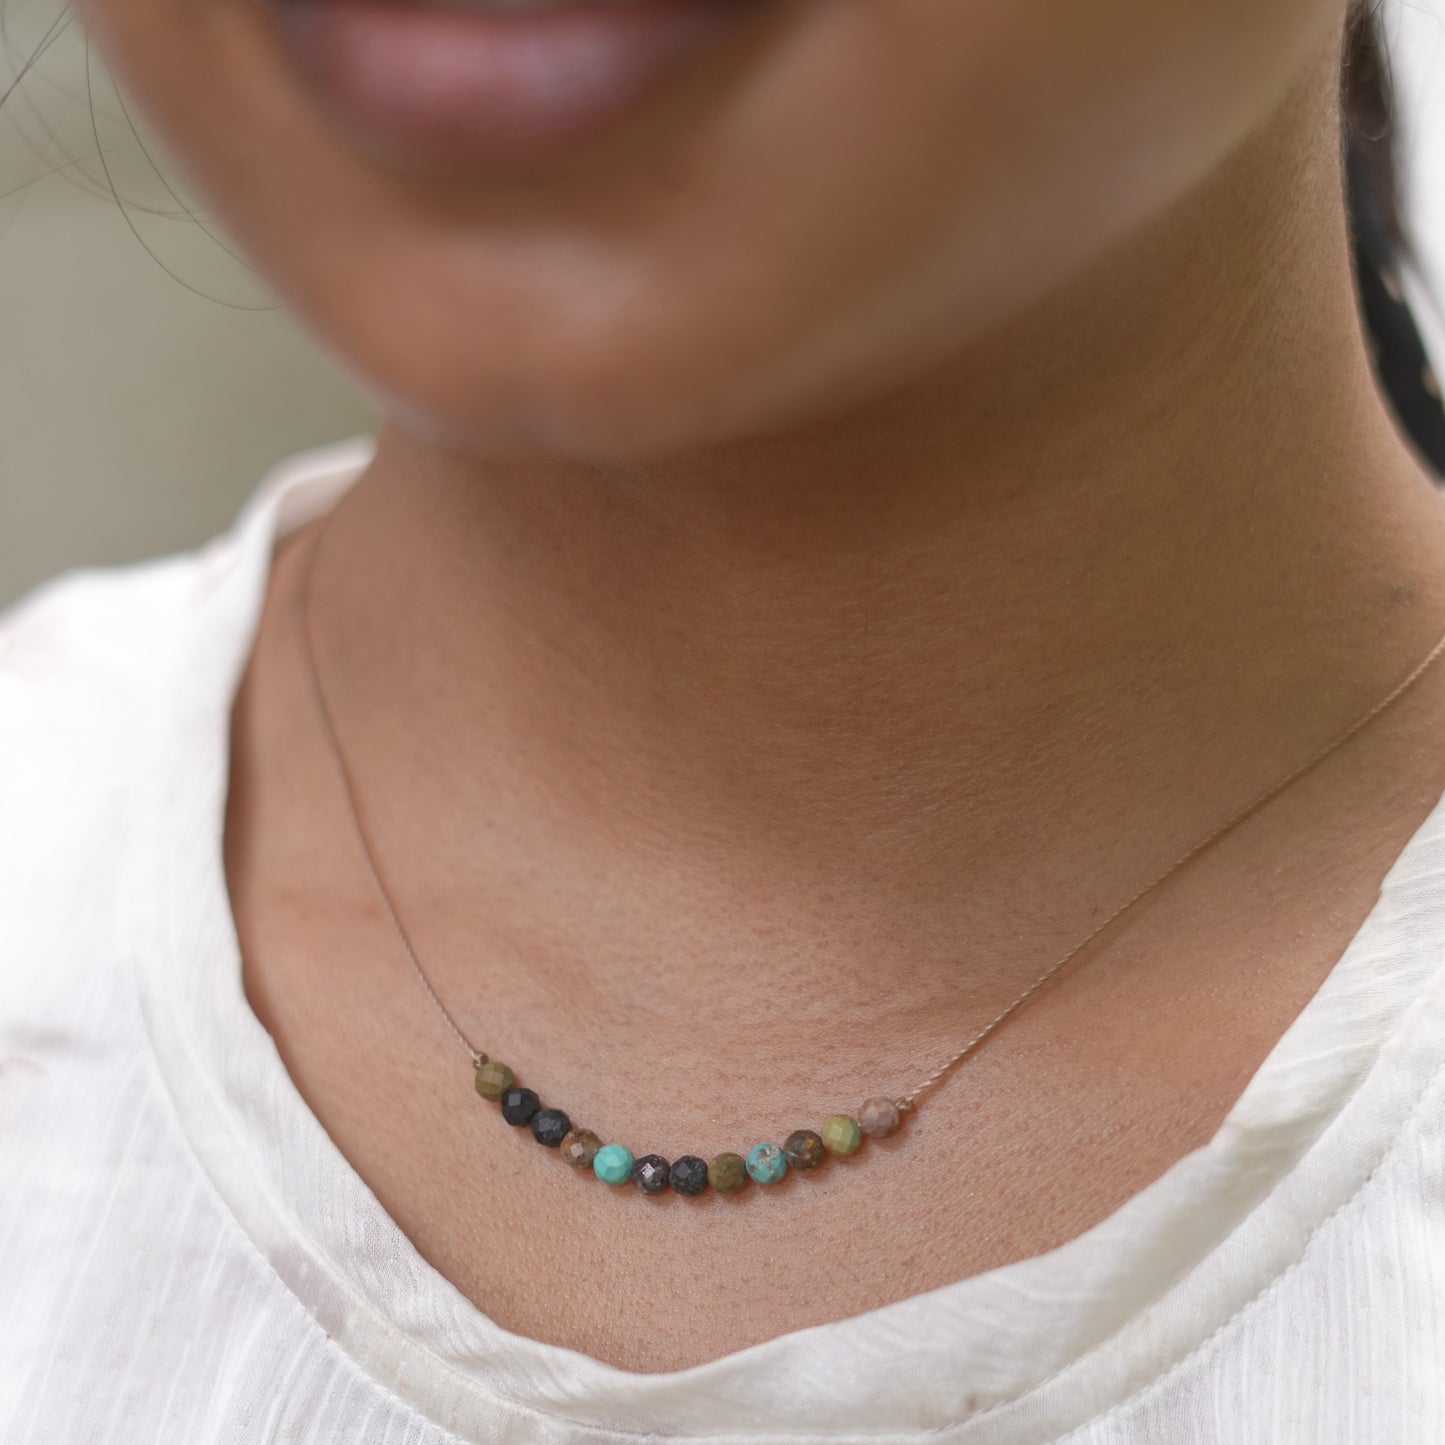 Dainty African Turquoise Necklace - December Birthstone